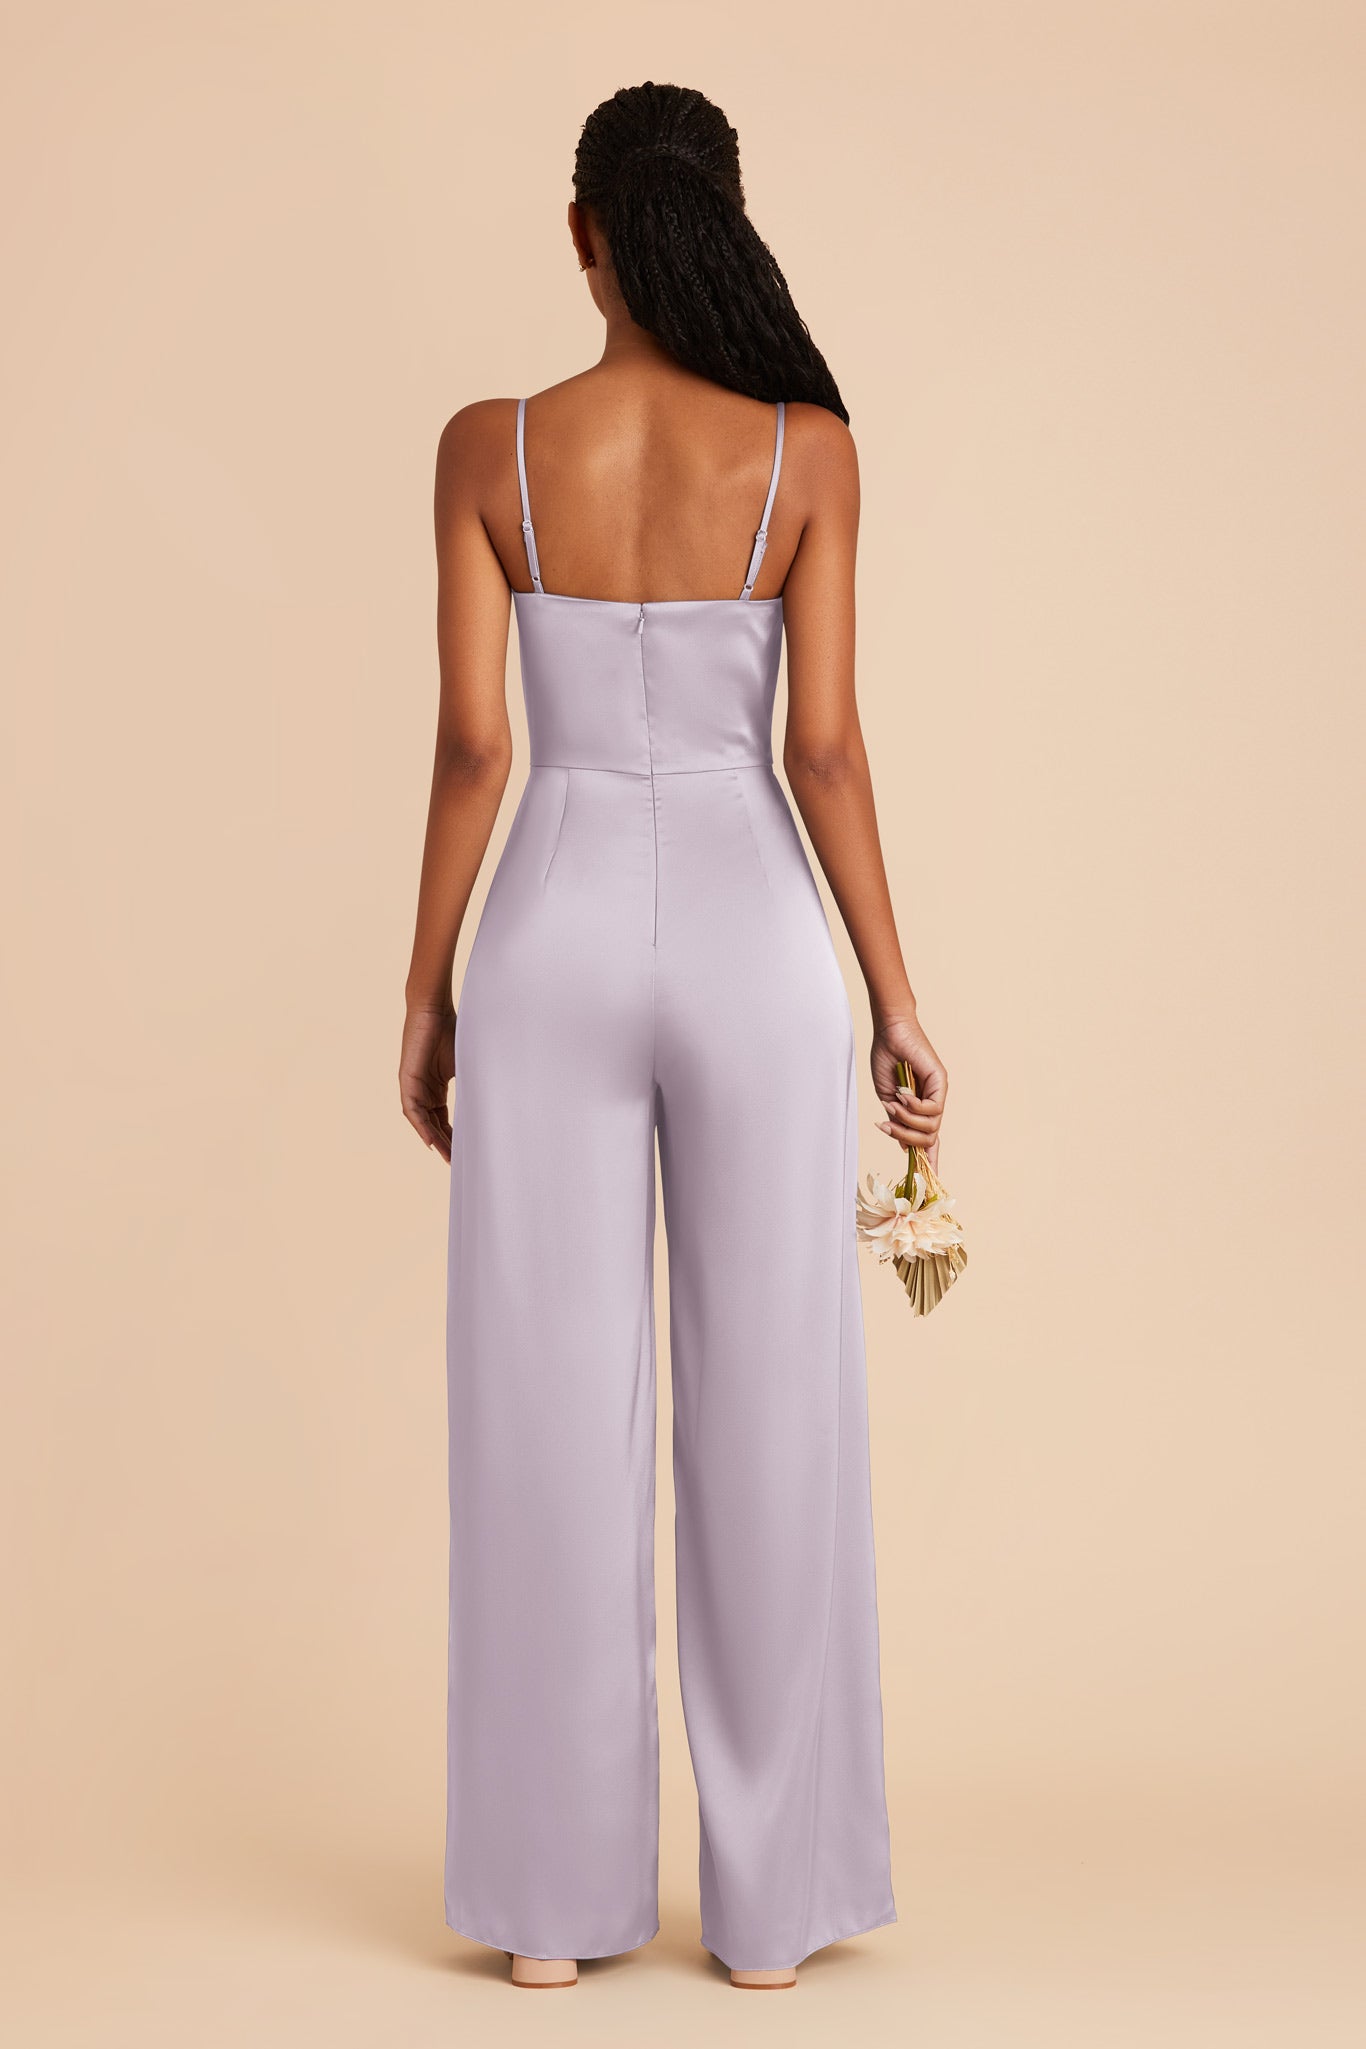 Dusty Lilac Donna Matte Satin Bridesmaid Jumpsuit by Birdy Grey